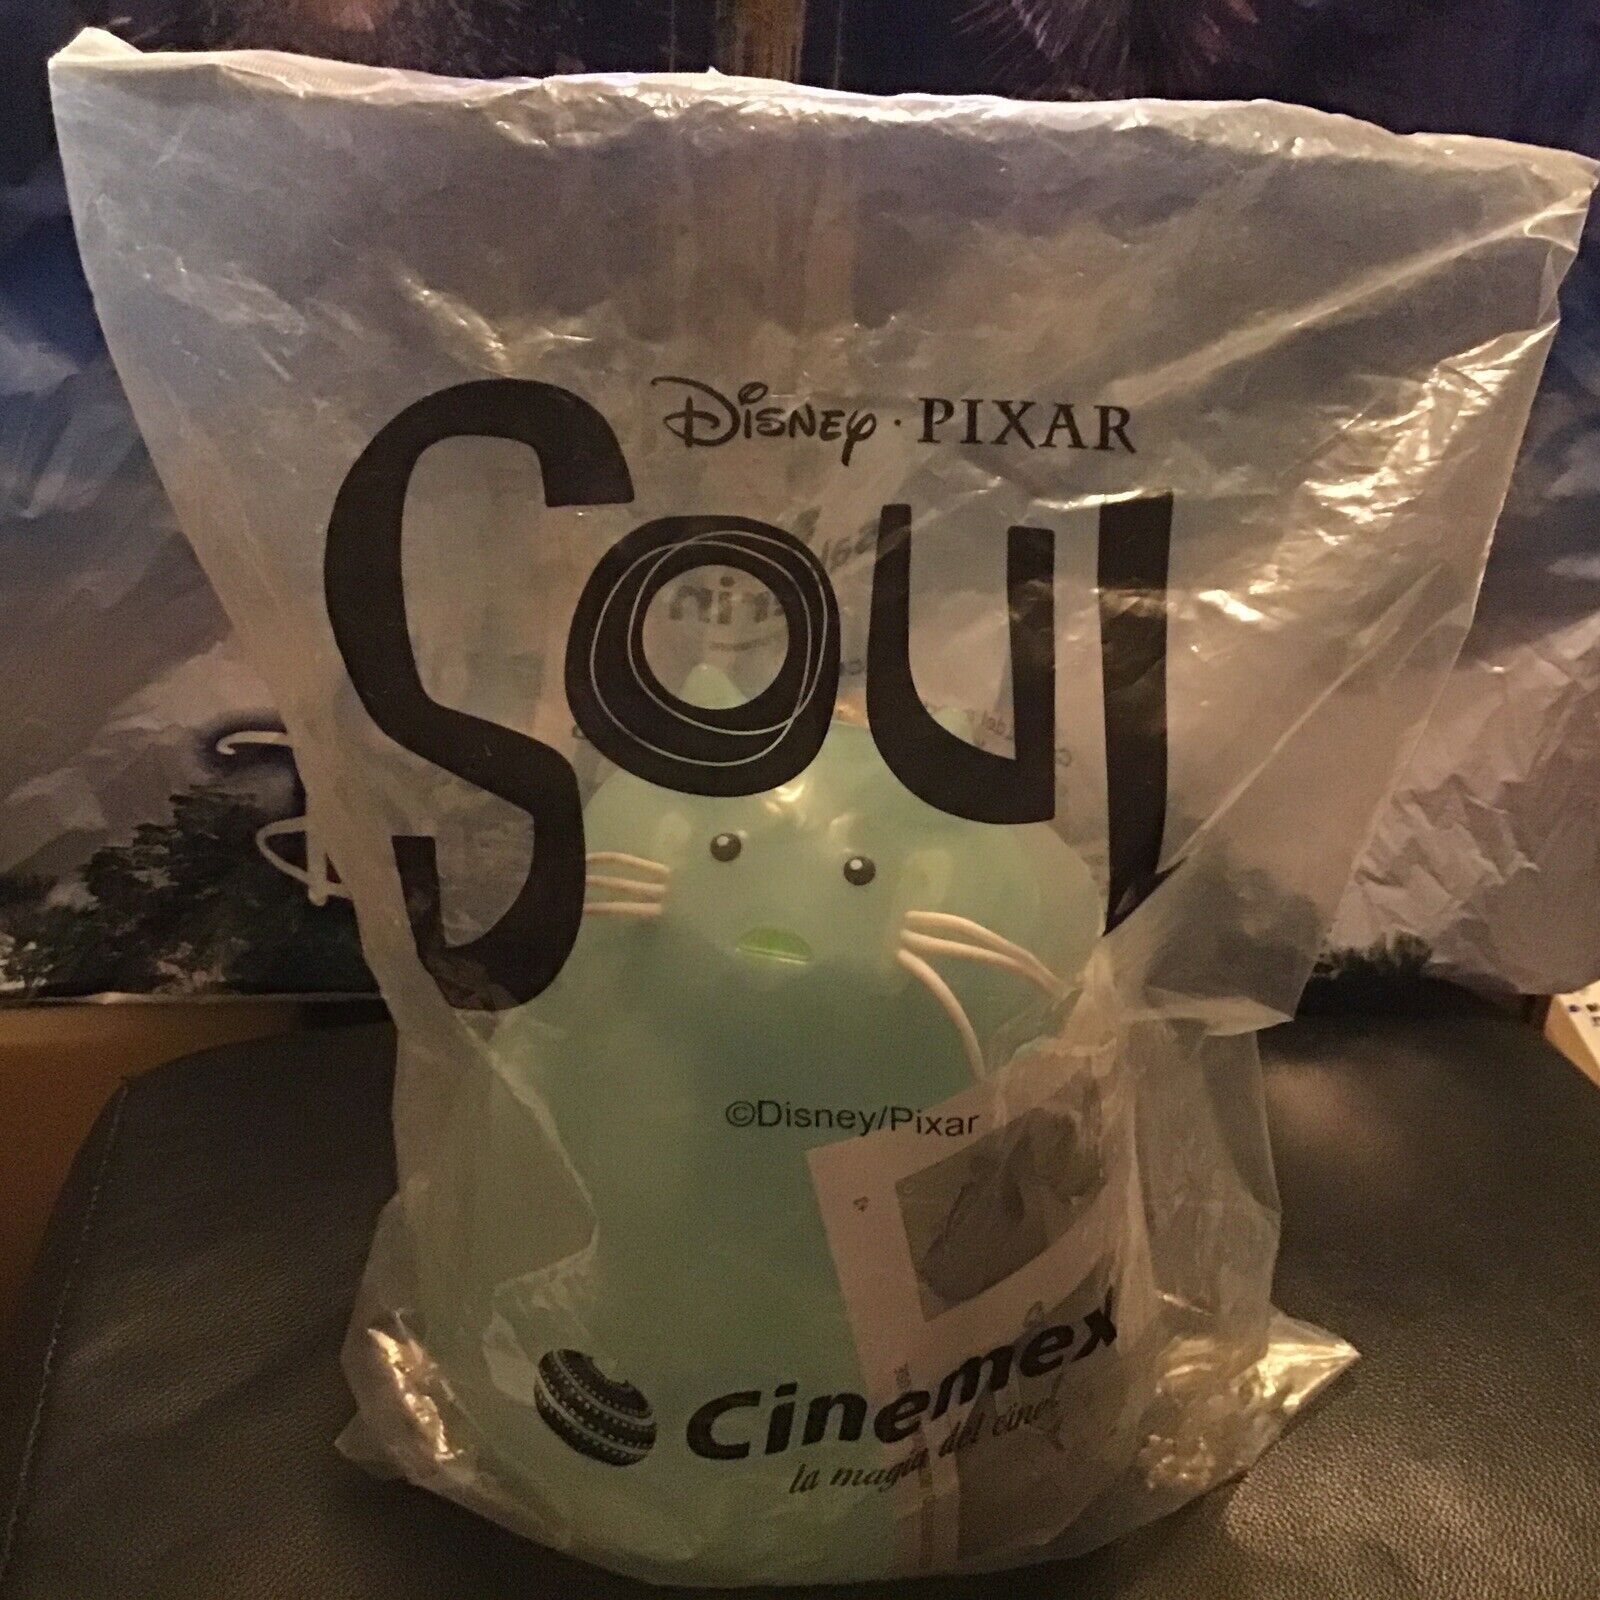 Disney Pixar SOUL-NEW in Original Bag MINT-PROMO in Mexico Only - JUST REDUCED